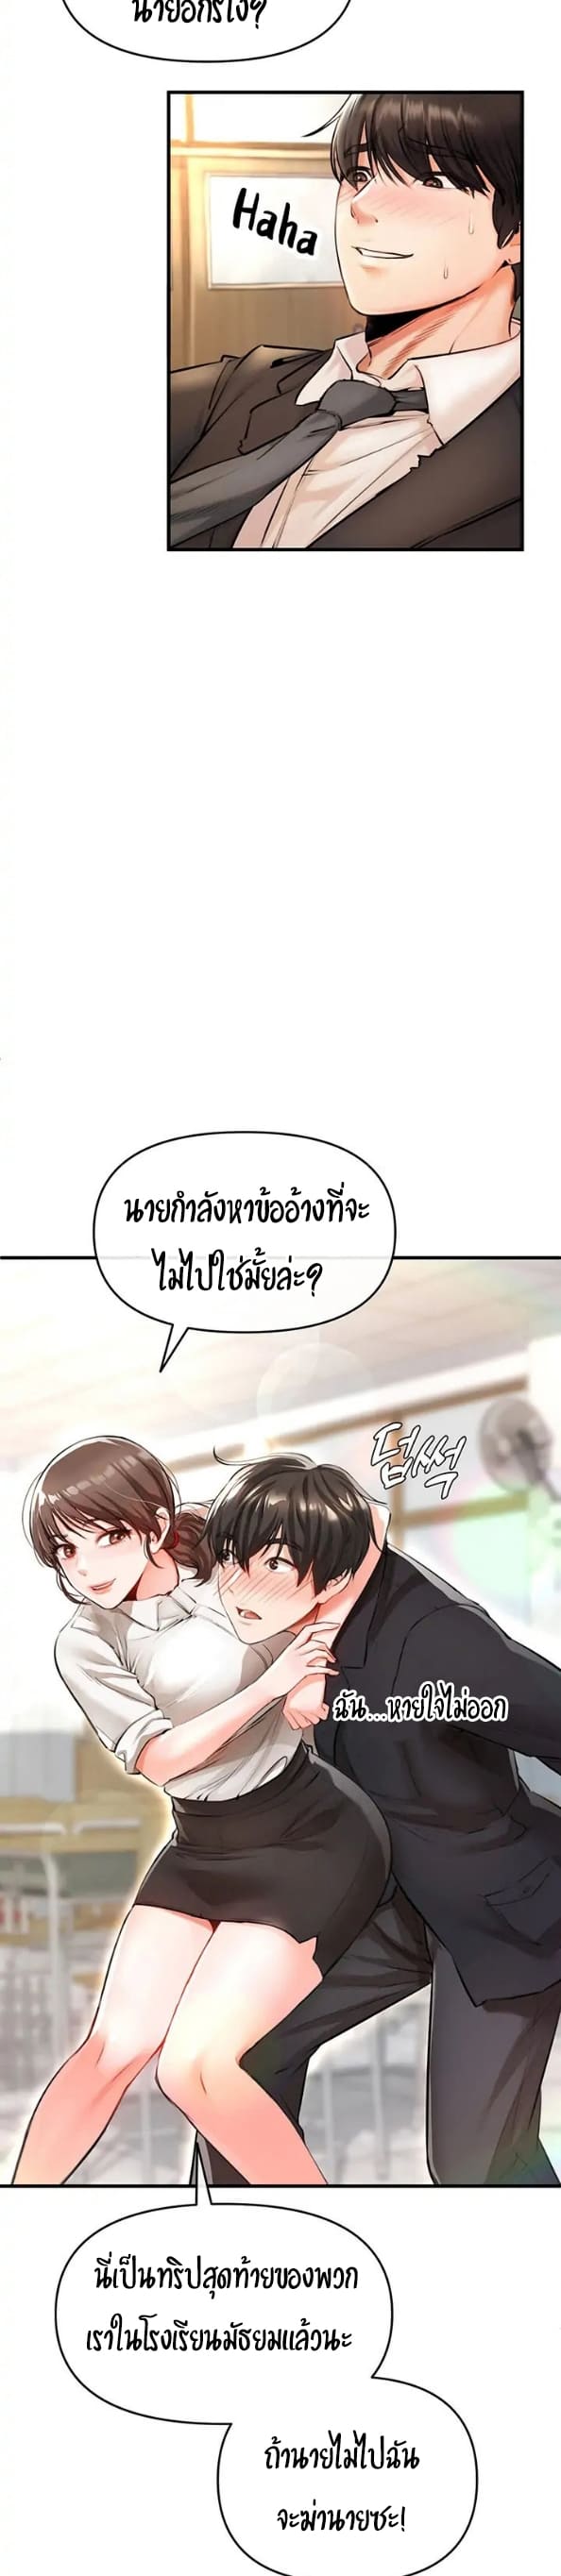 The Real Deal ตอนที่ 1 ภาพ 34